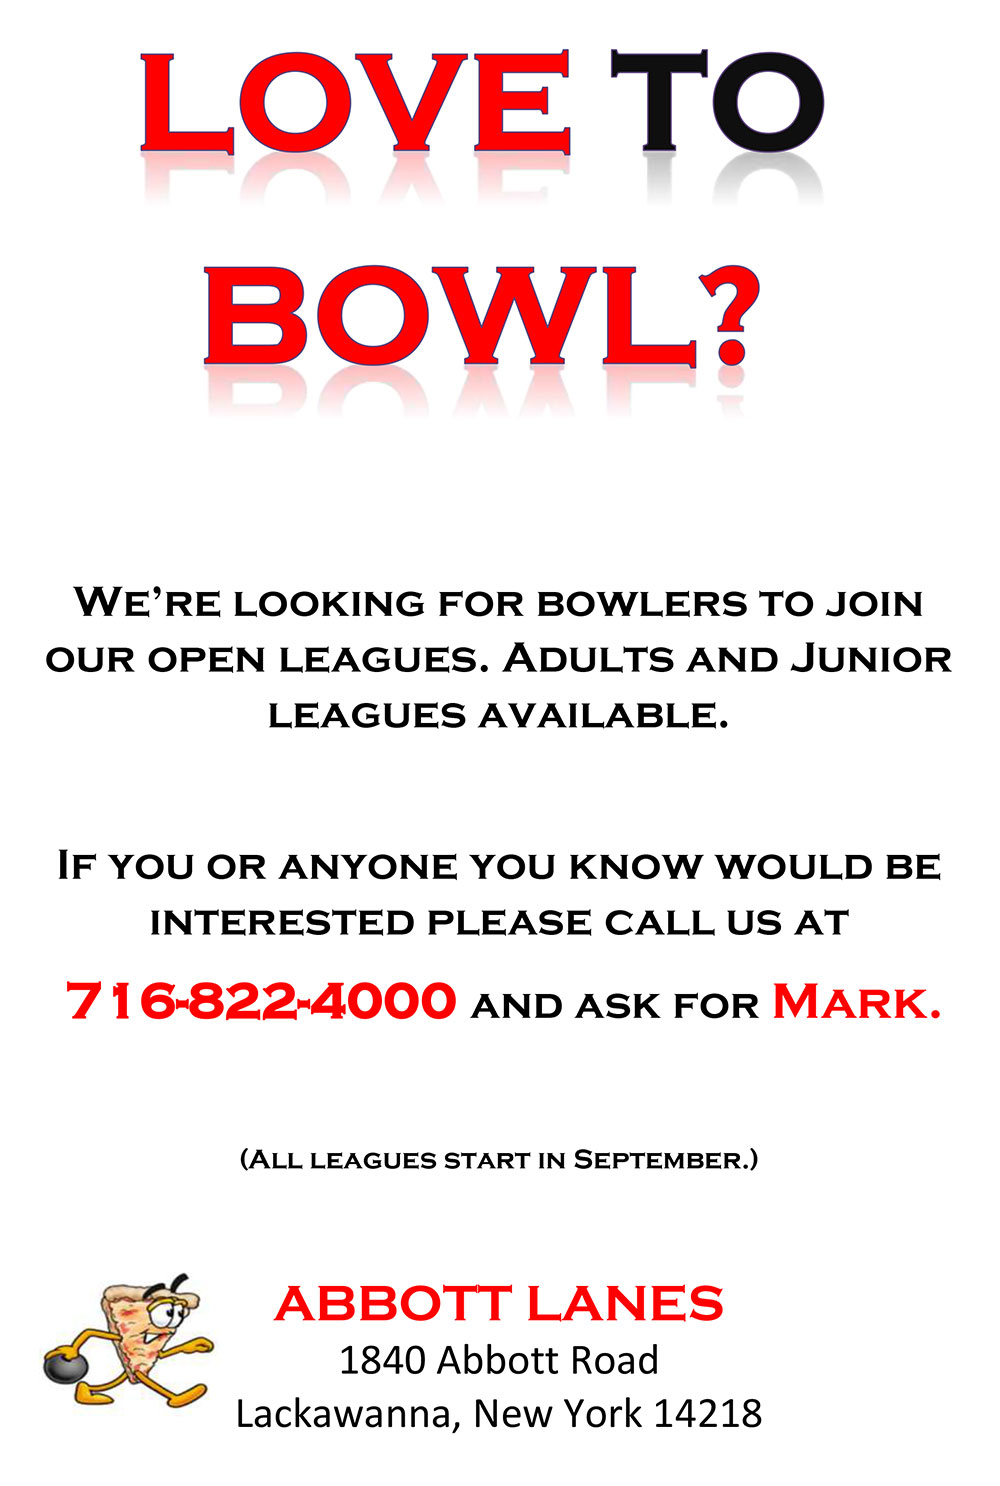 Looking for Bowlers